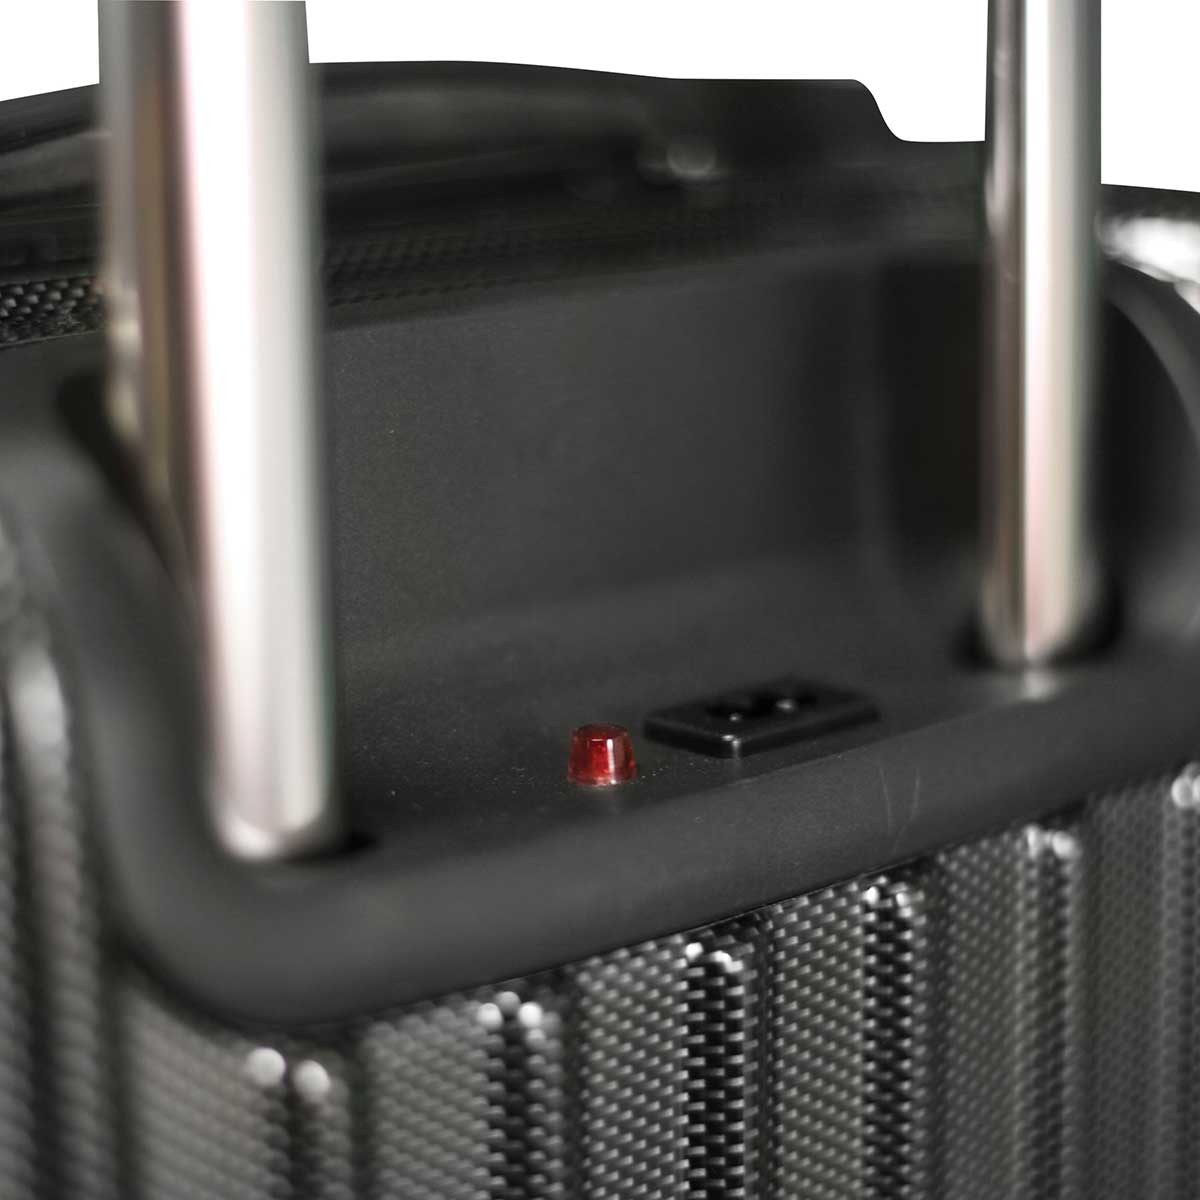 Designed with strength in mind, ThermalStrike luggage Is equipped with a toughened telescopic aluminum handle, reinforced corner guards and an integrated TSA approved lock.